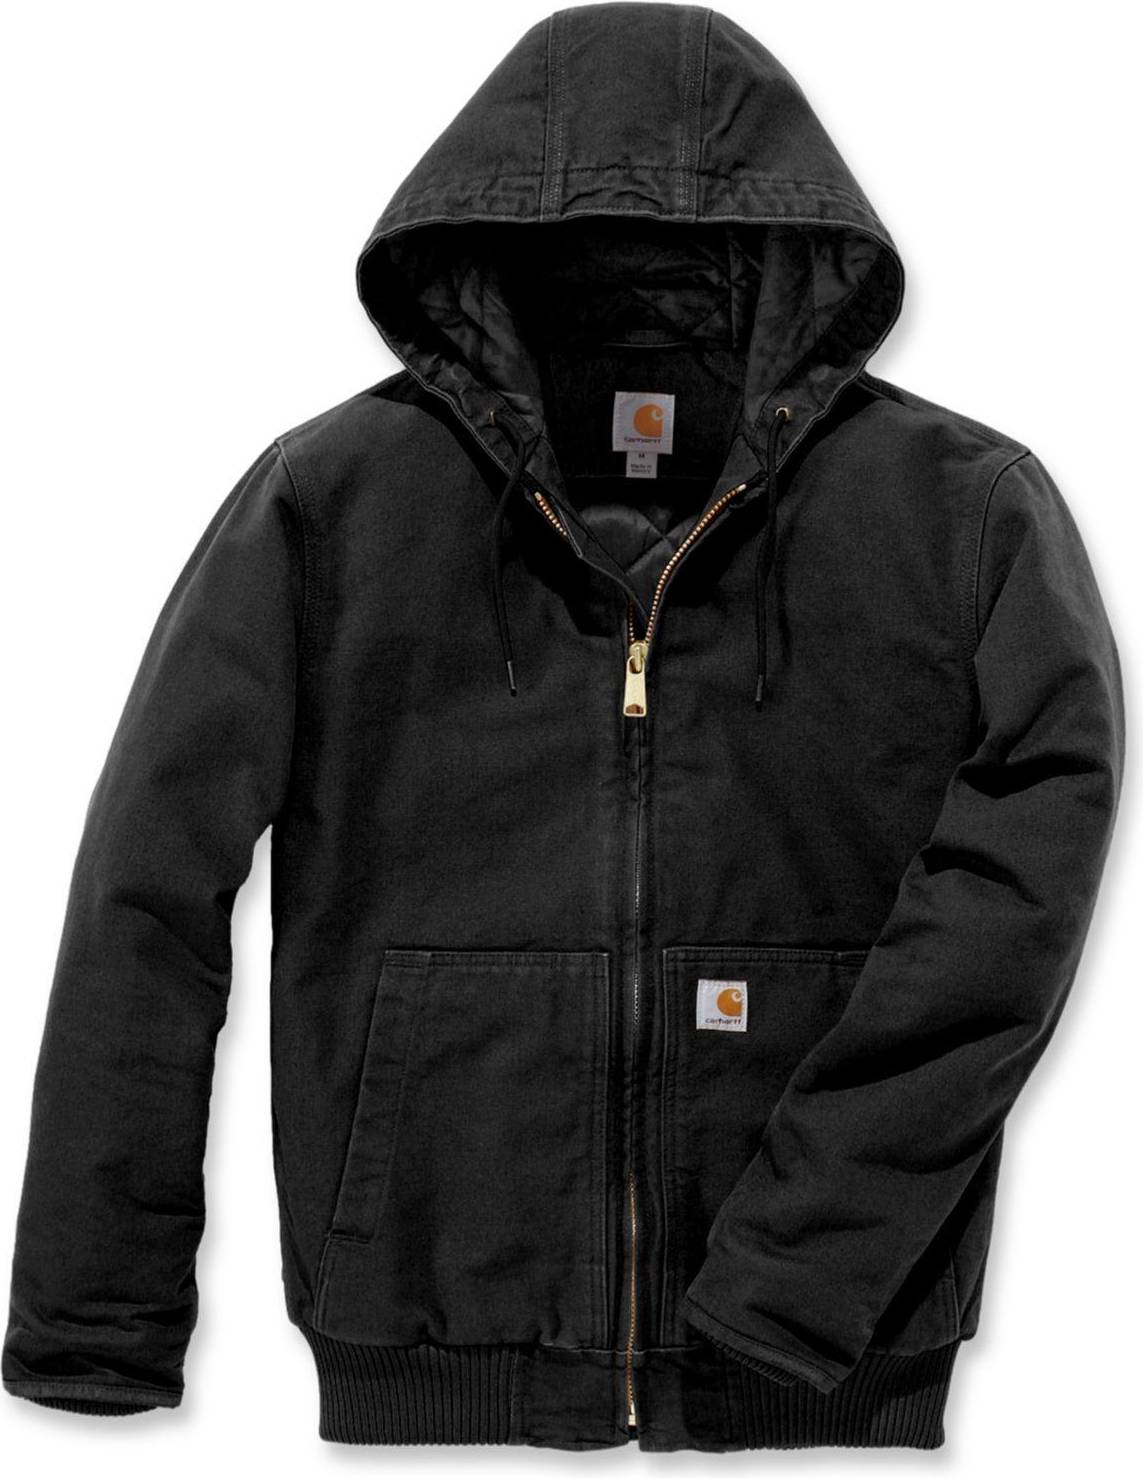 Carhartt Men's Loose Fit Washed Duck Insulated Active Jacket - Black ...